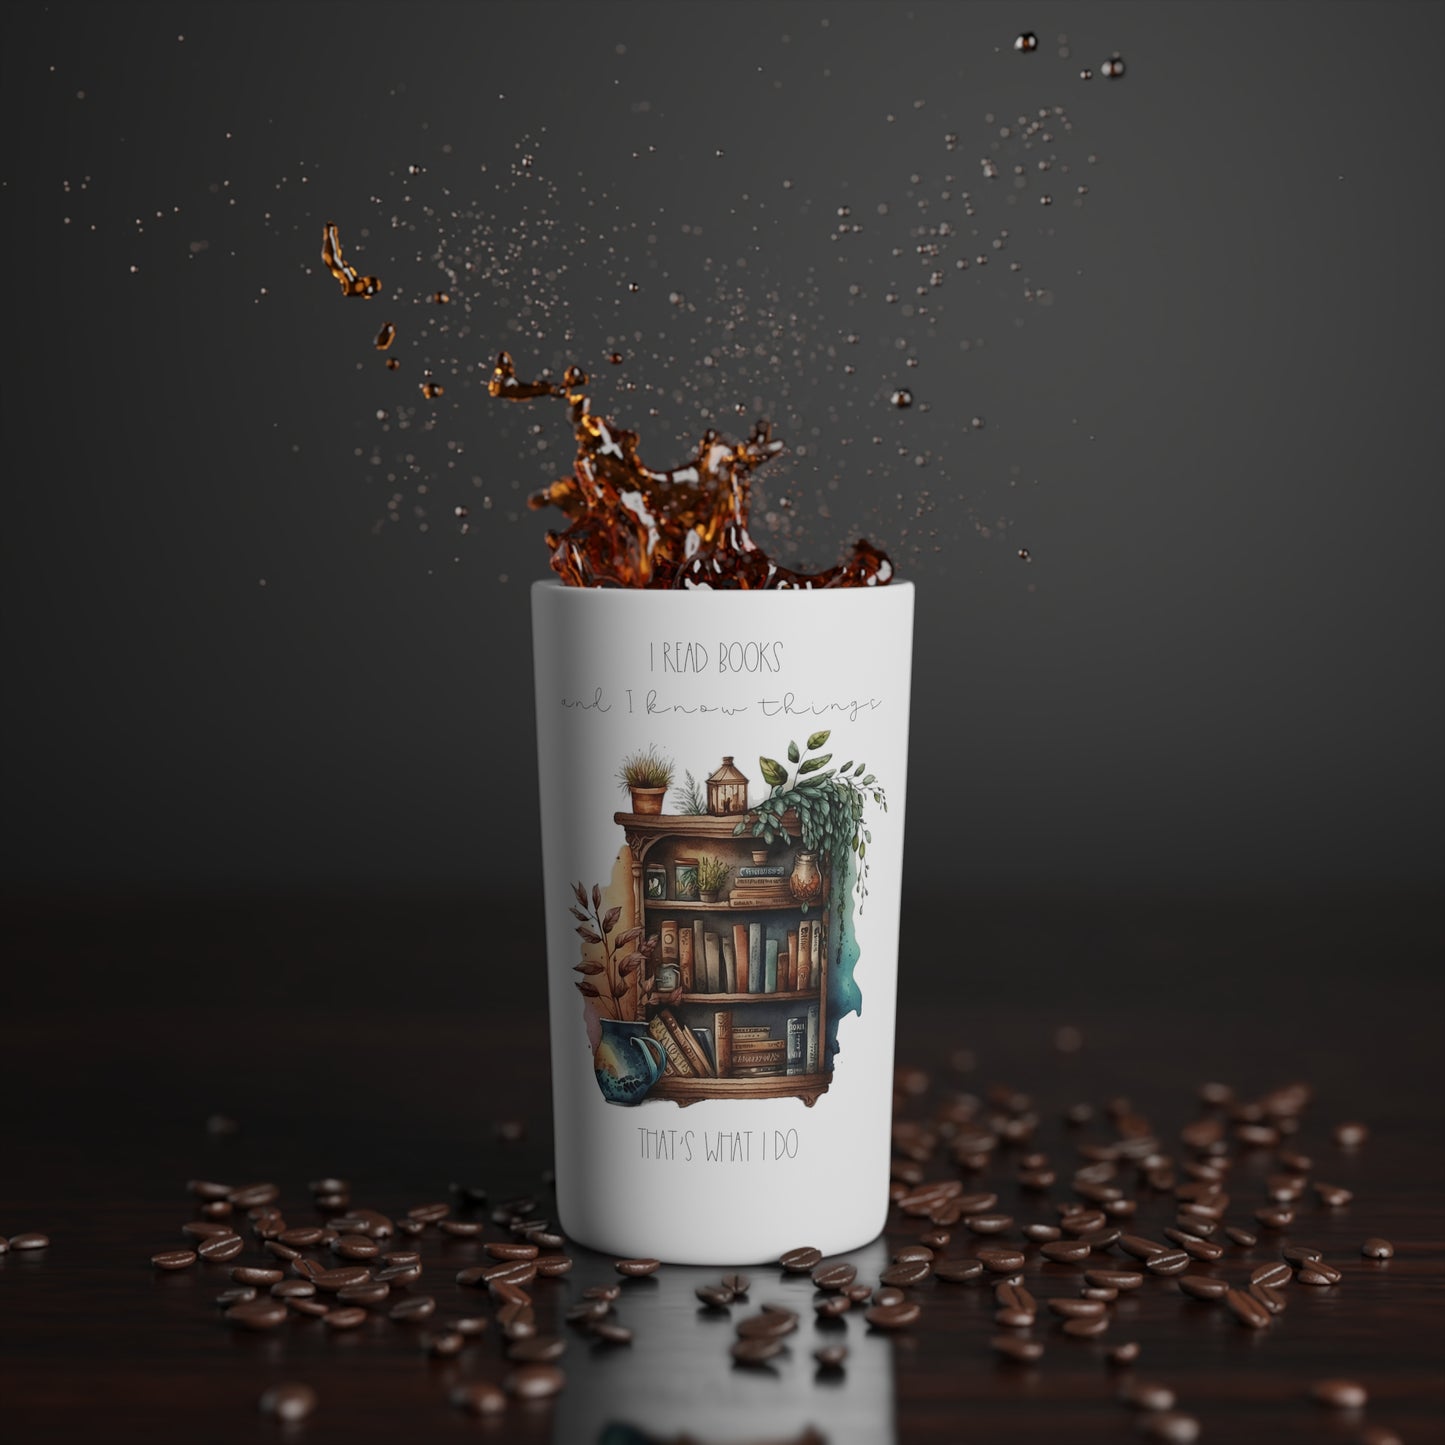 “I read books and I know things. That’s what I do.” Conical Coffee Mugs (3oz, 8oz, 12oz)